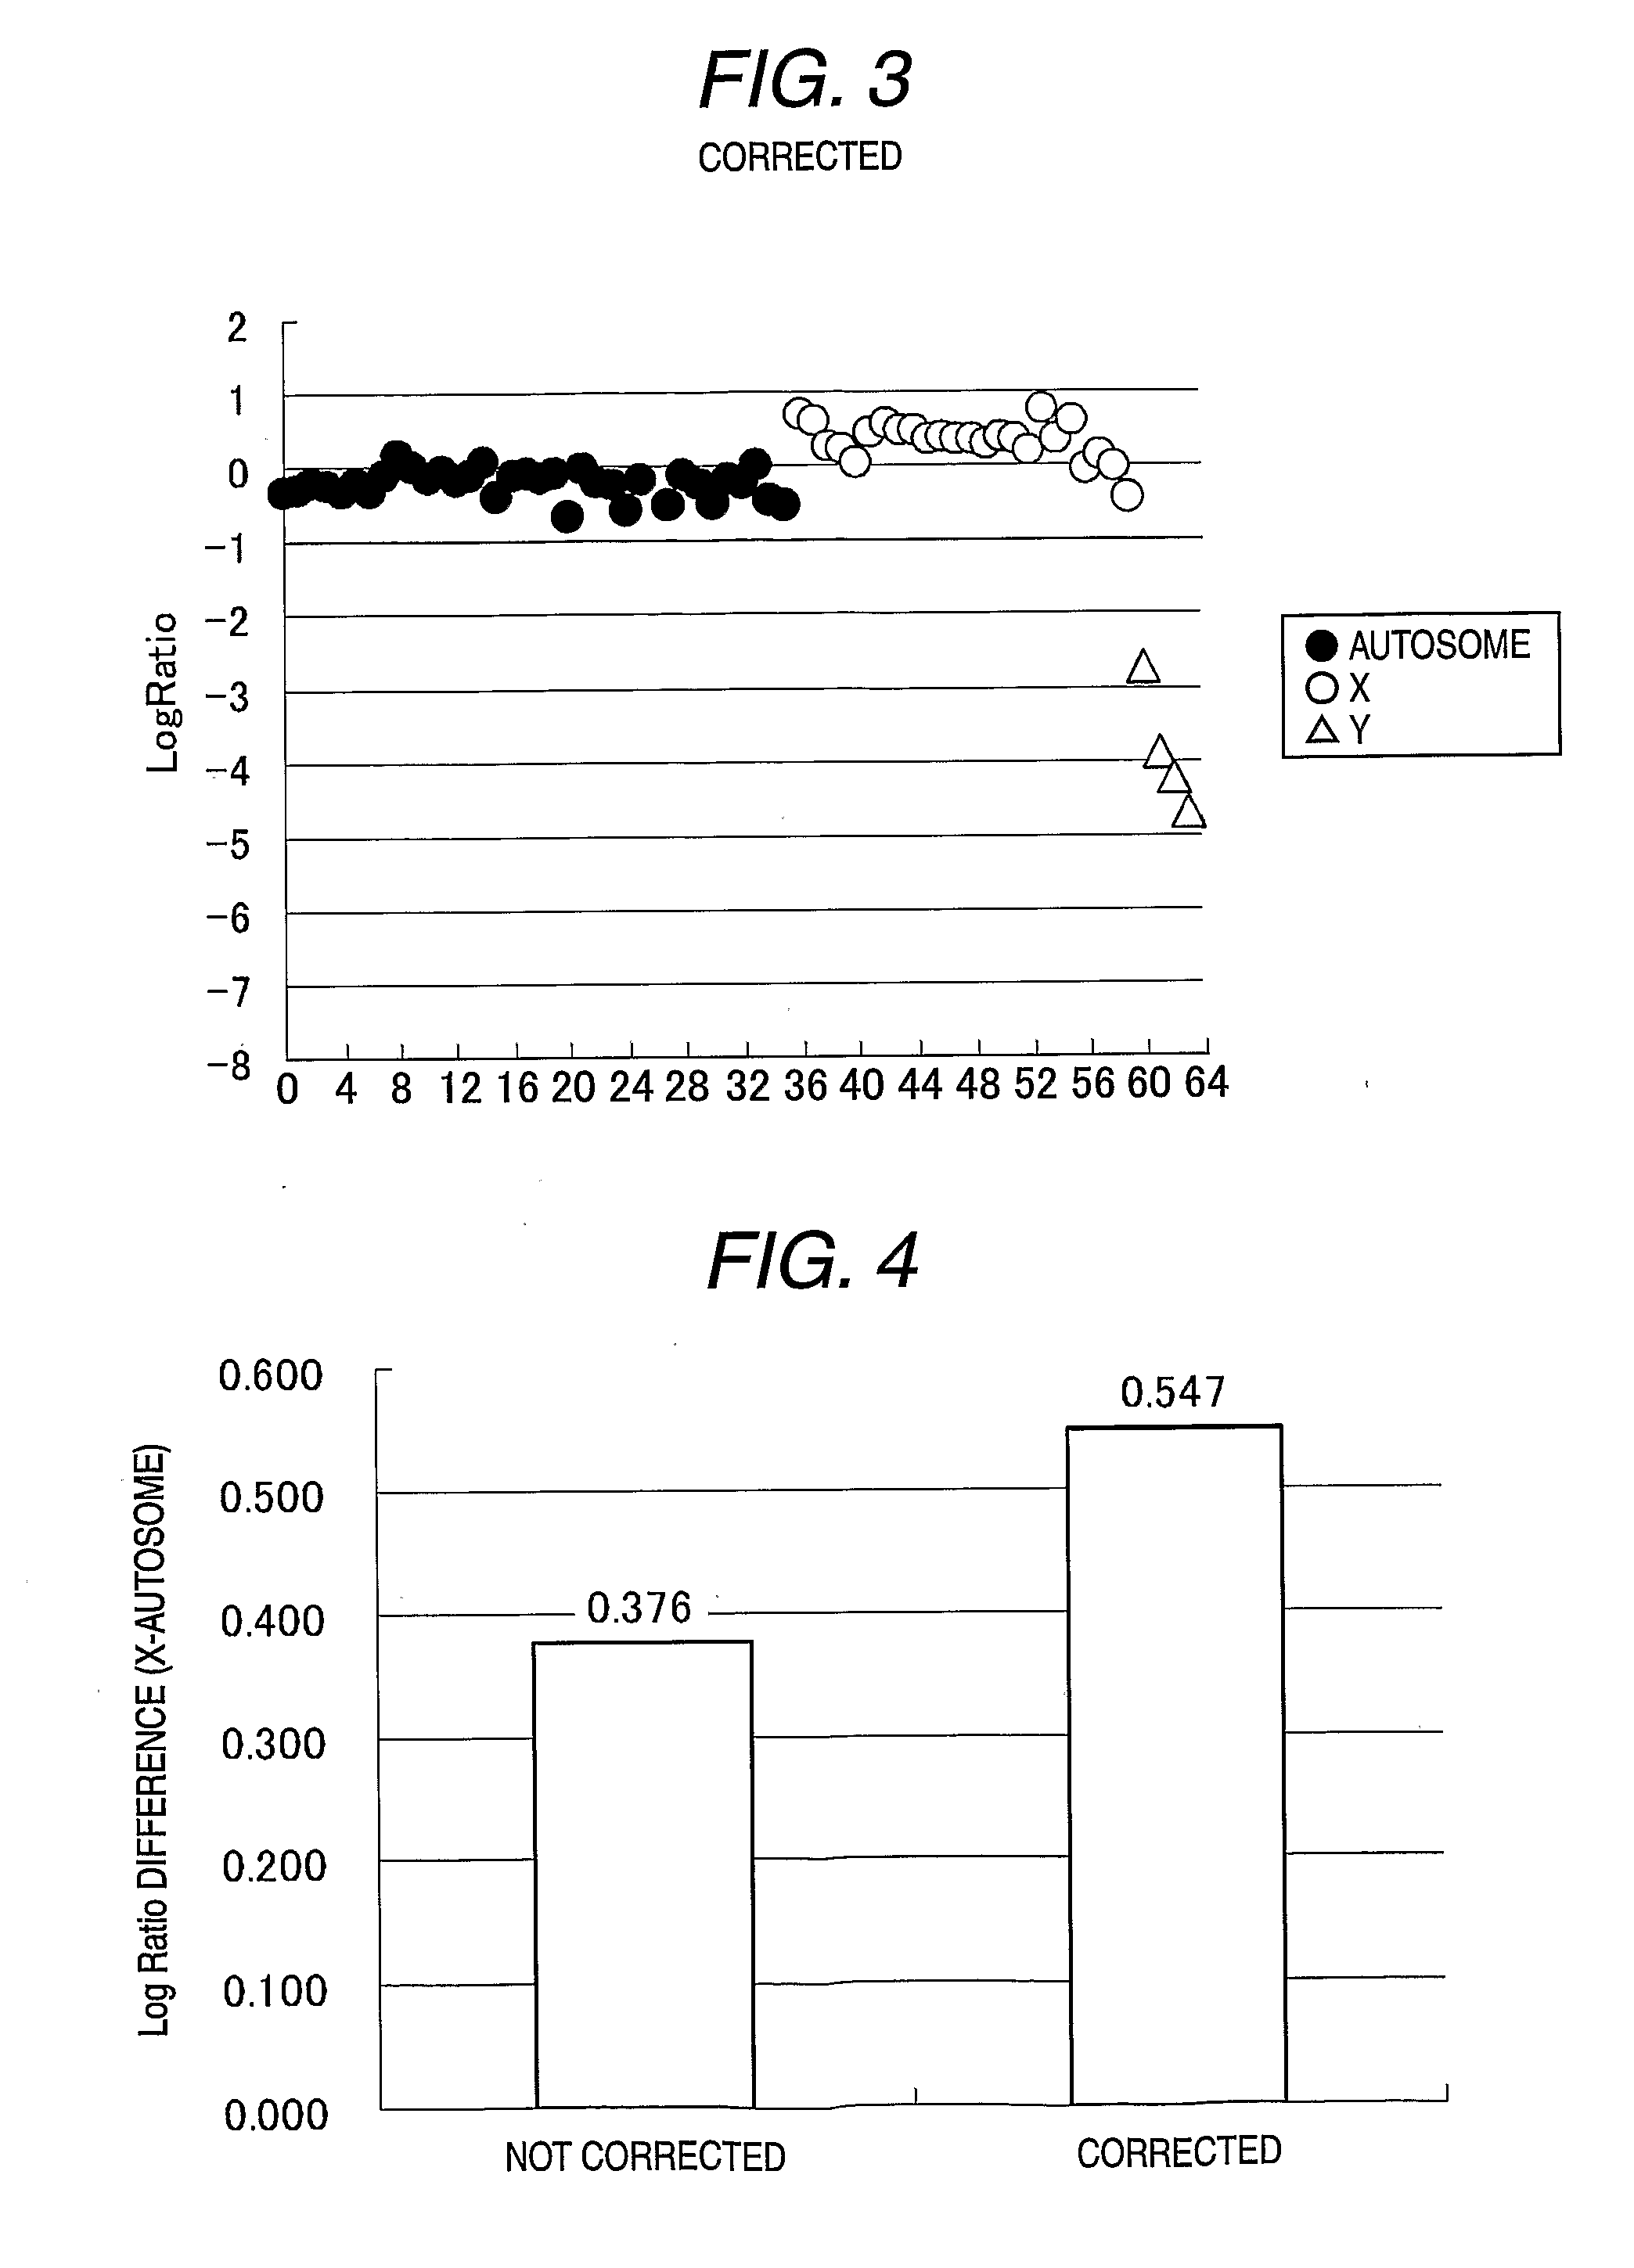 Method for analysis using nucleic acid microarray